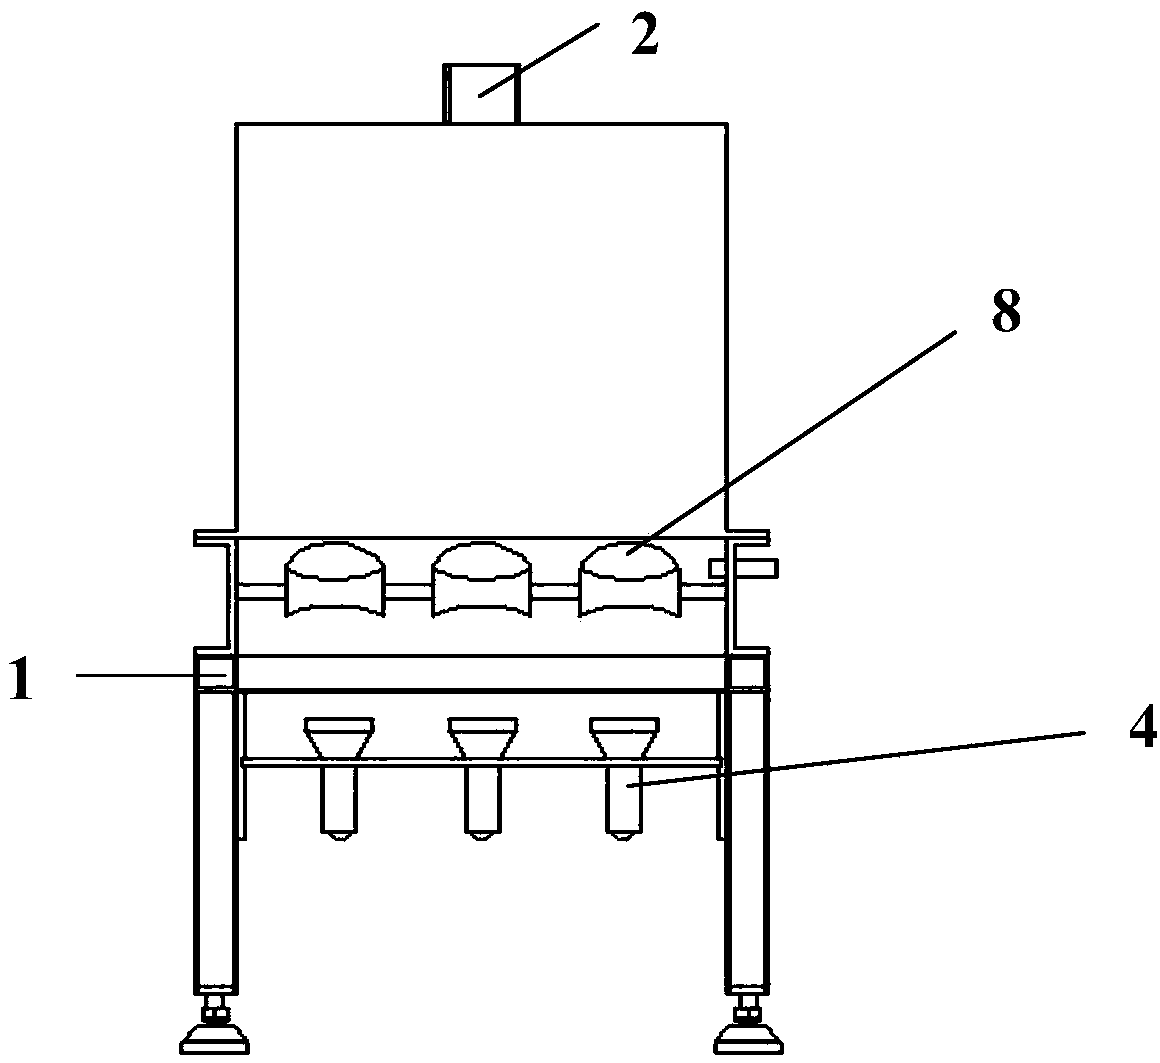 An online visual inspection device and method for the internal quality of salted eggs